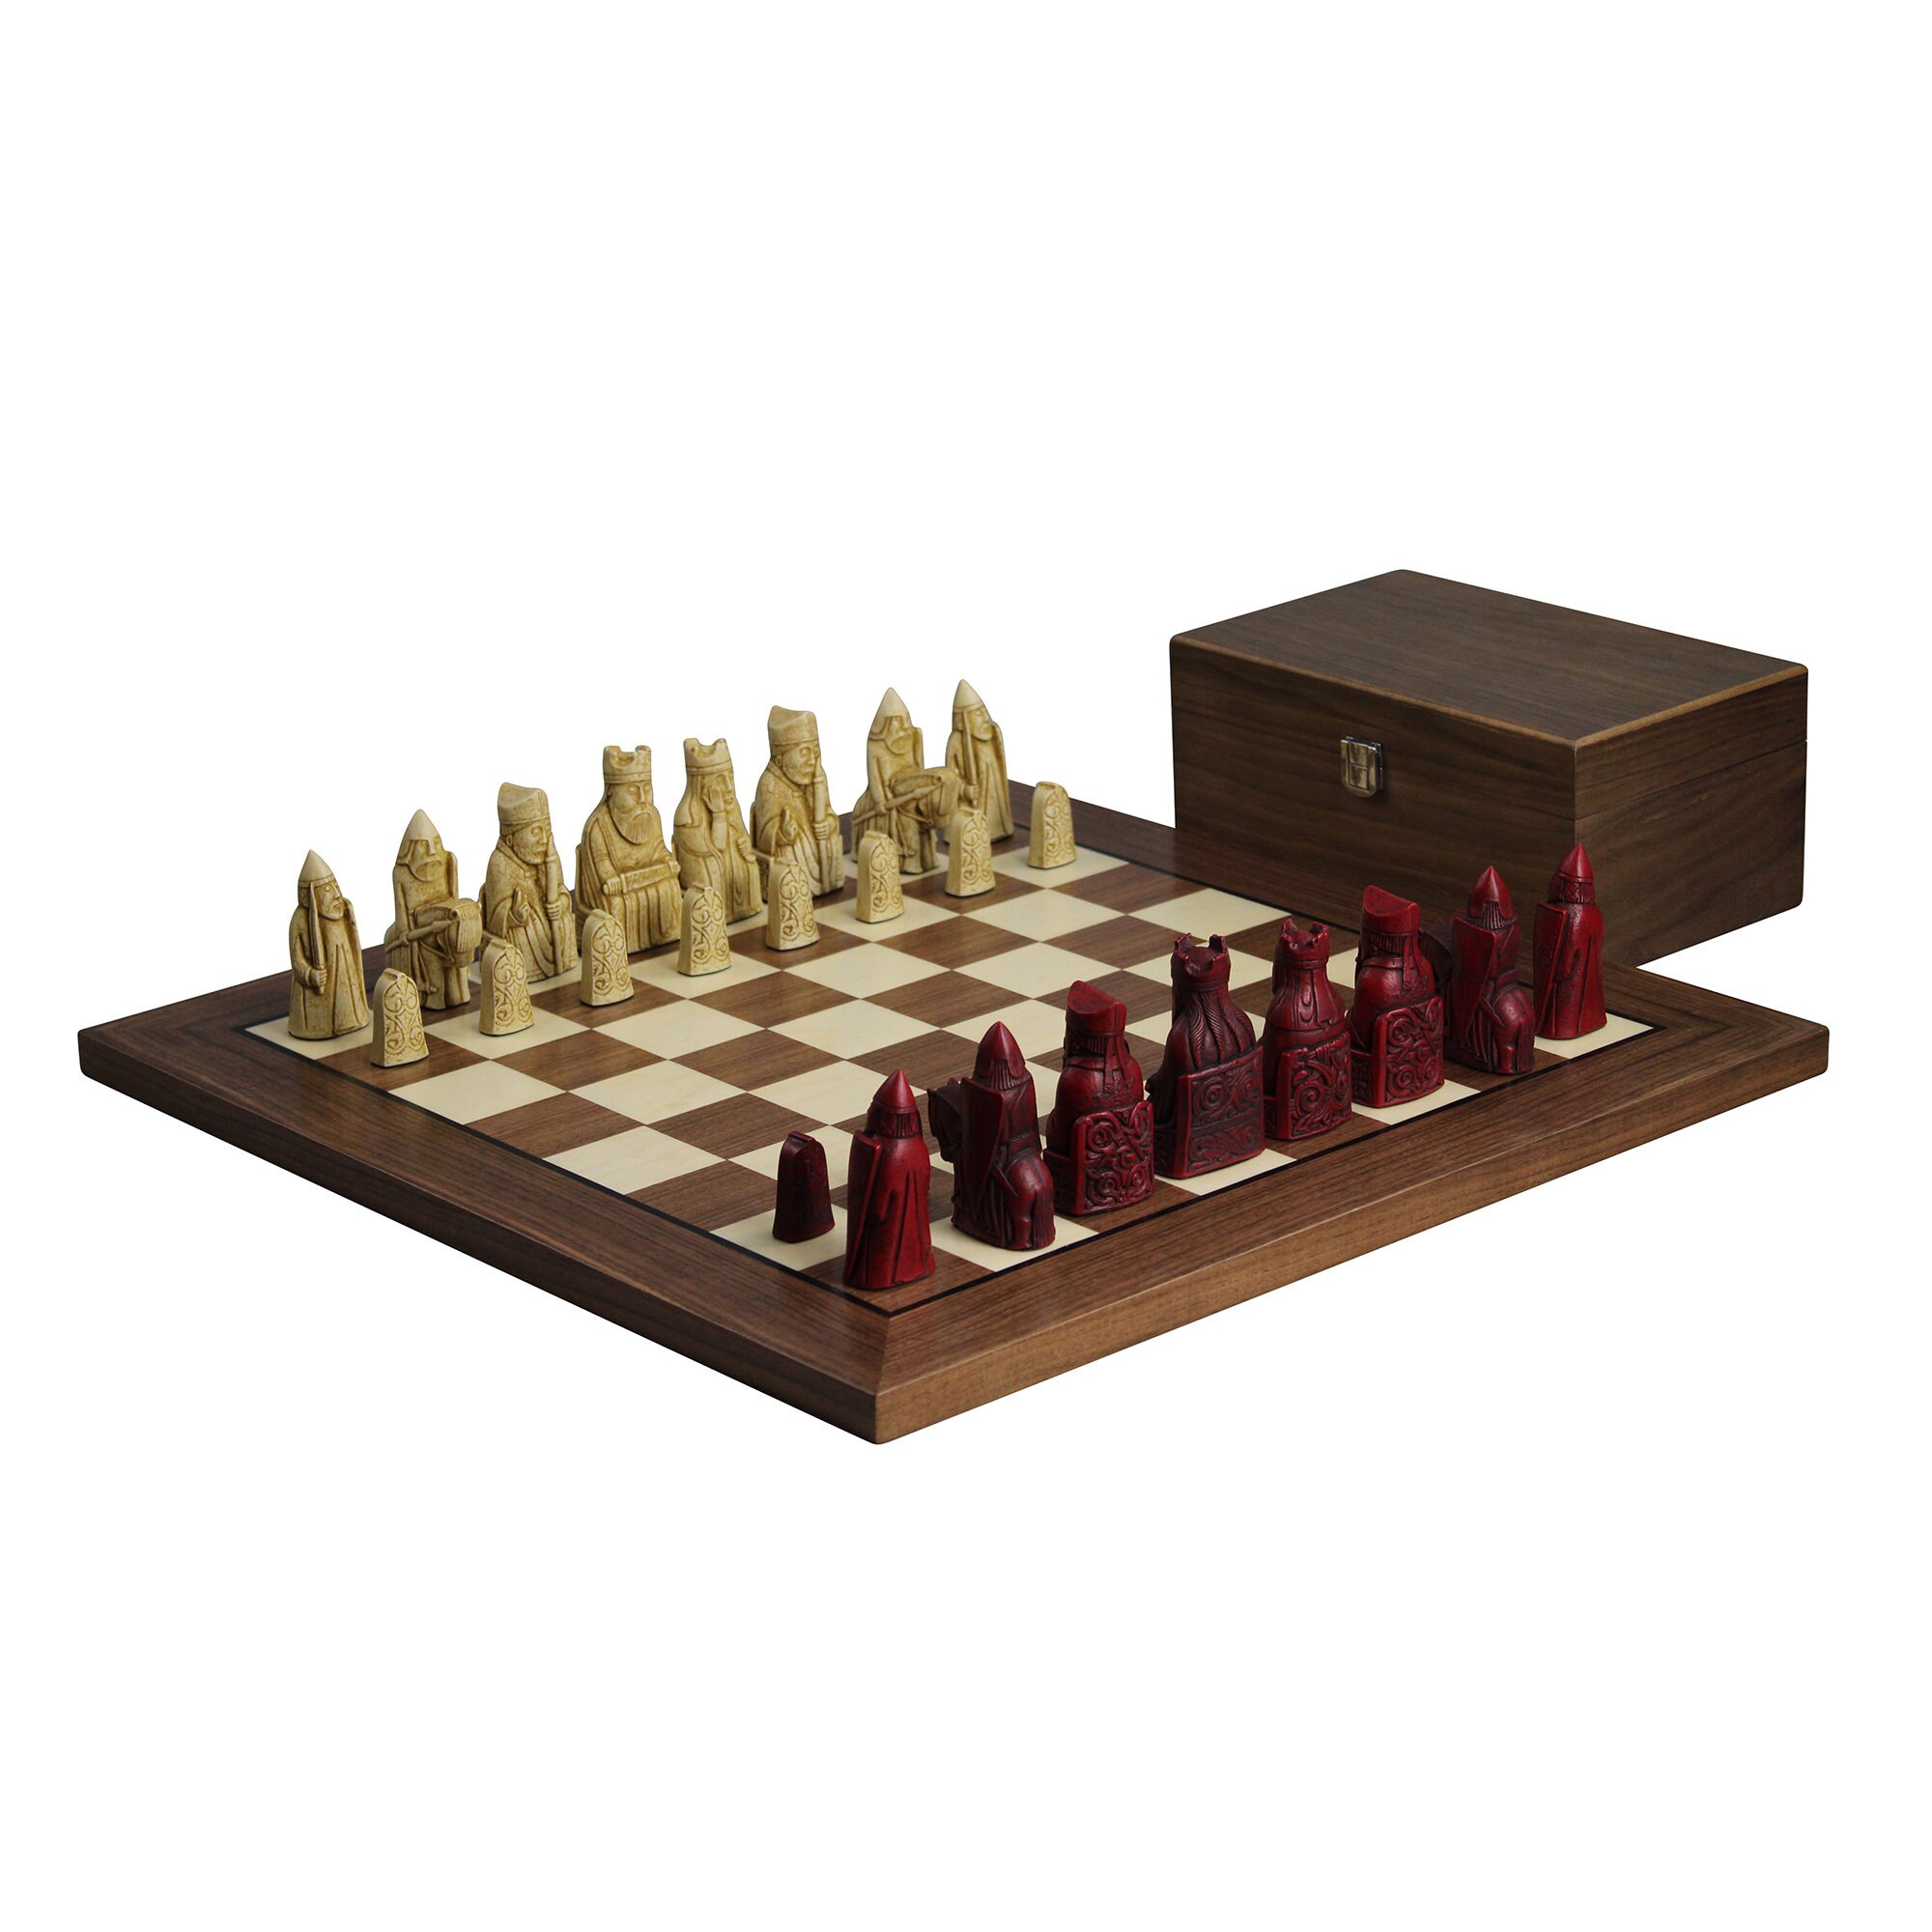 Is a chess rating in the 1100s a good chess rating on Chess.com